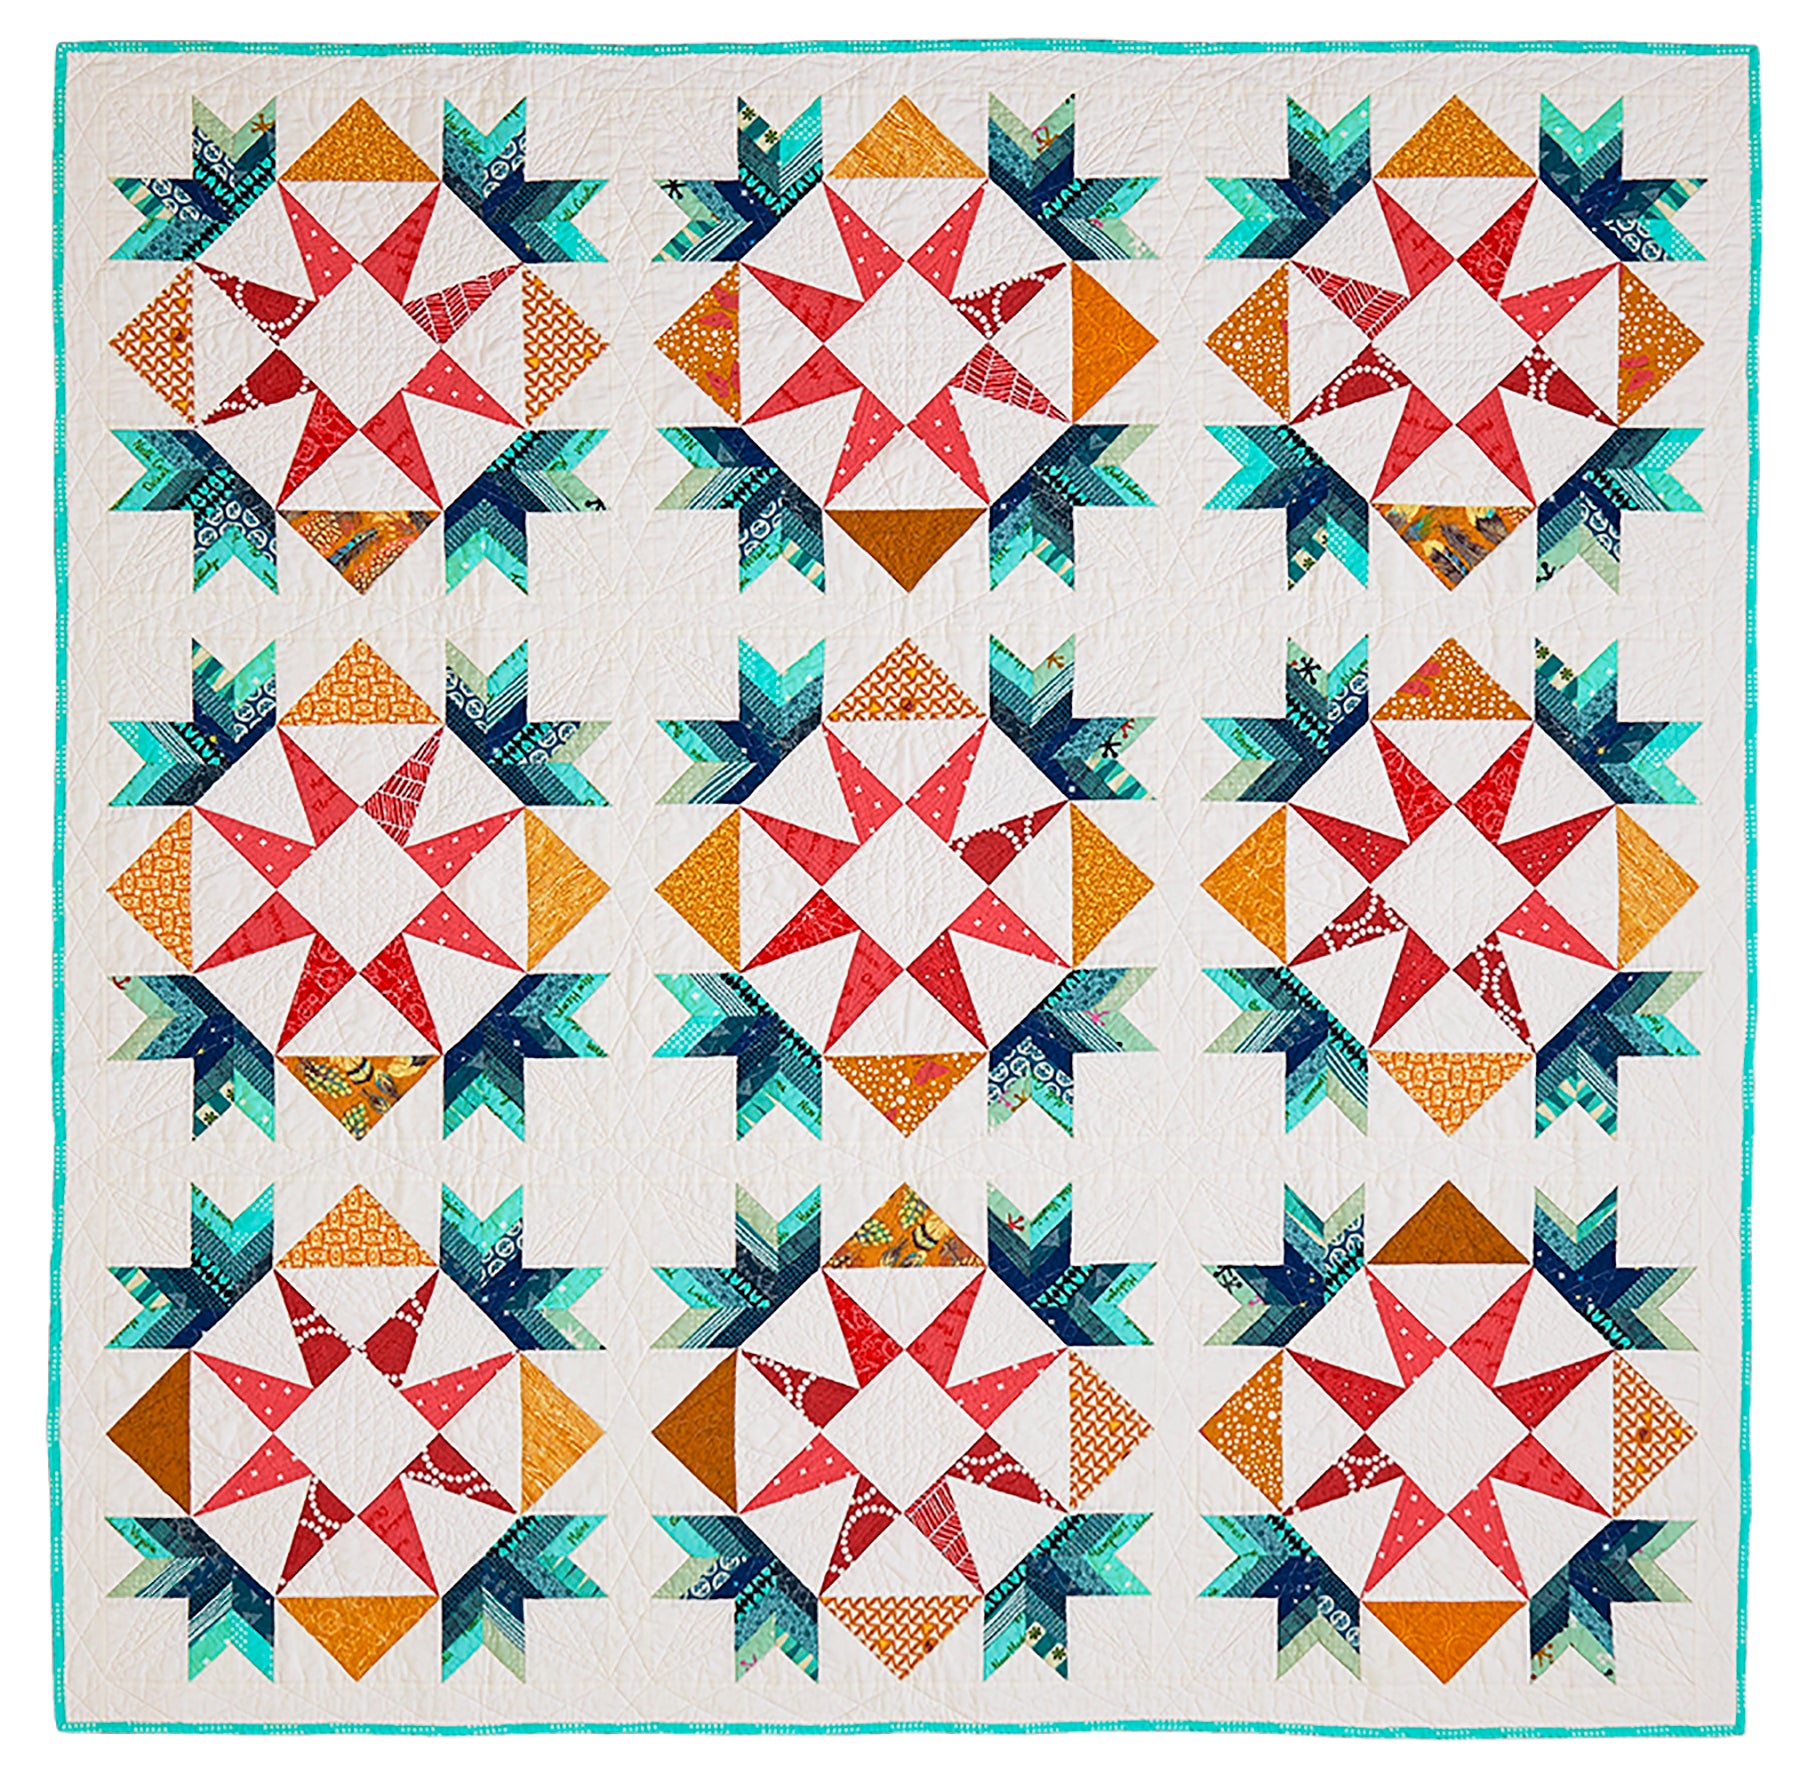 Star Bright Quilt by Rebecca Bryan